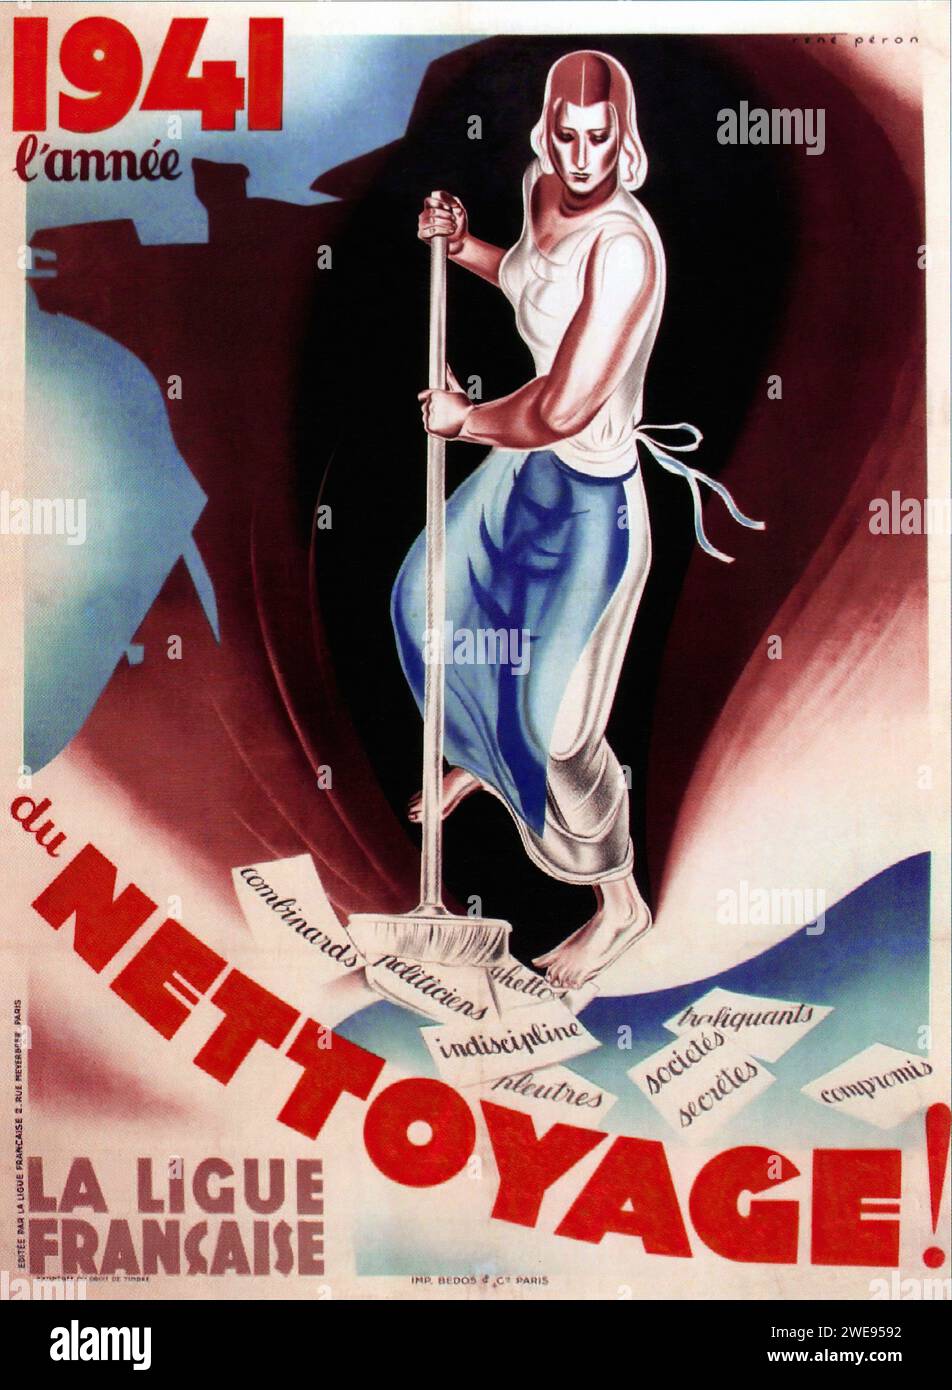 '1941 l'année du NETTOYAGE! LA LIGUE FRANÇAISE' [1941 the year of CLEANING! THE FRENCH LEAGUE] Vintage French Propaganda poster depicting a woman in a white and blue robe sweeping papers labeled with negative traits. The image has a patriotic and propagandist style with strong colors and clean lines, characteristic of early 20th-century political art. Stock Photo